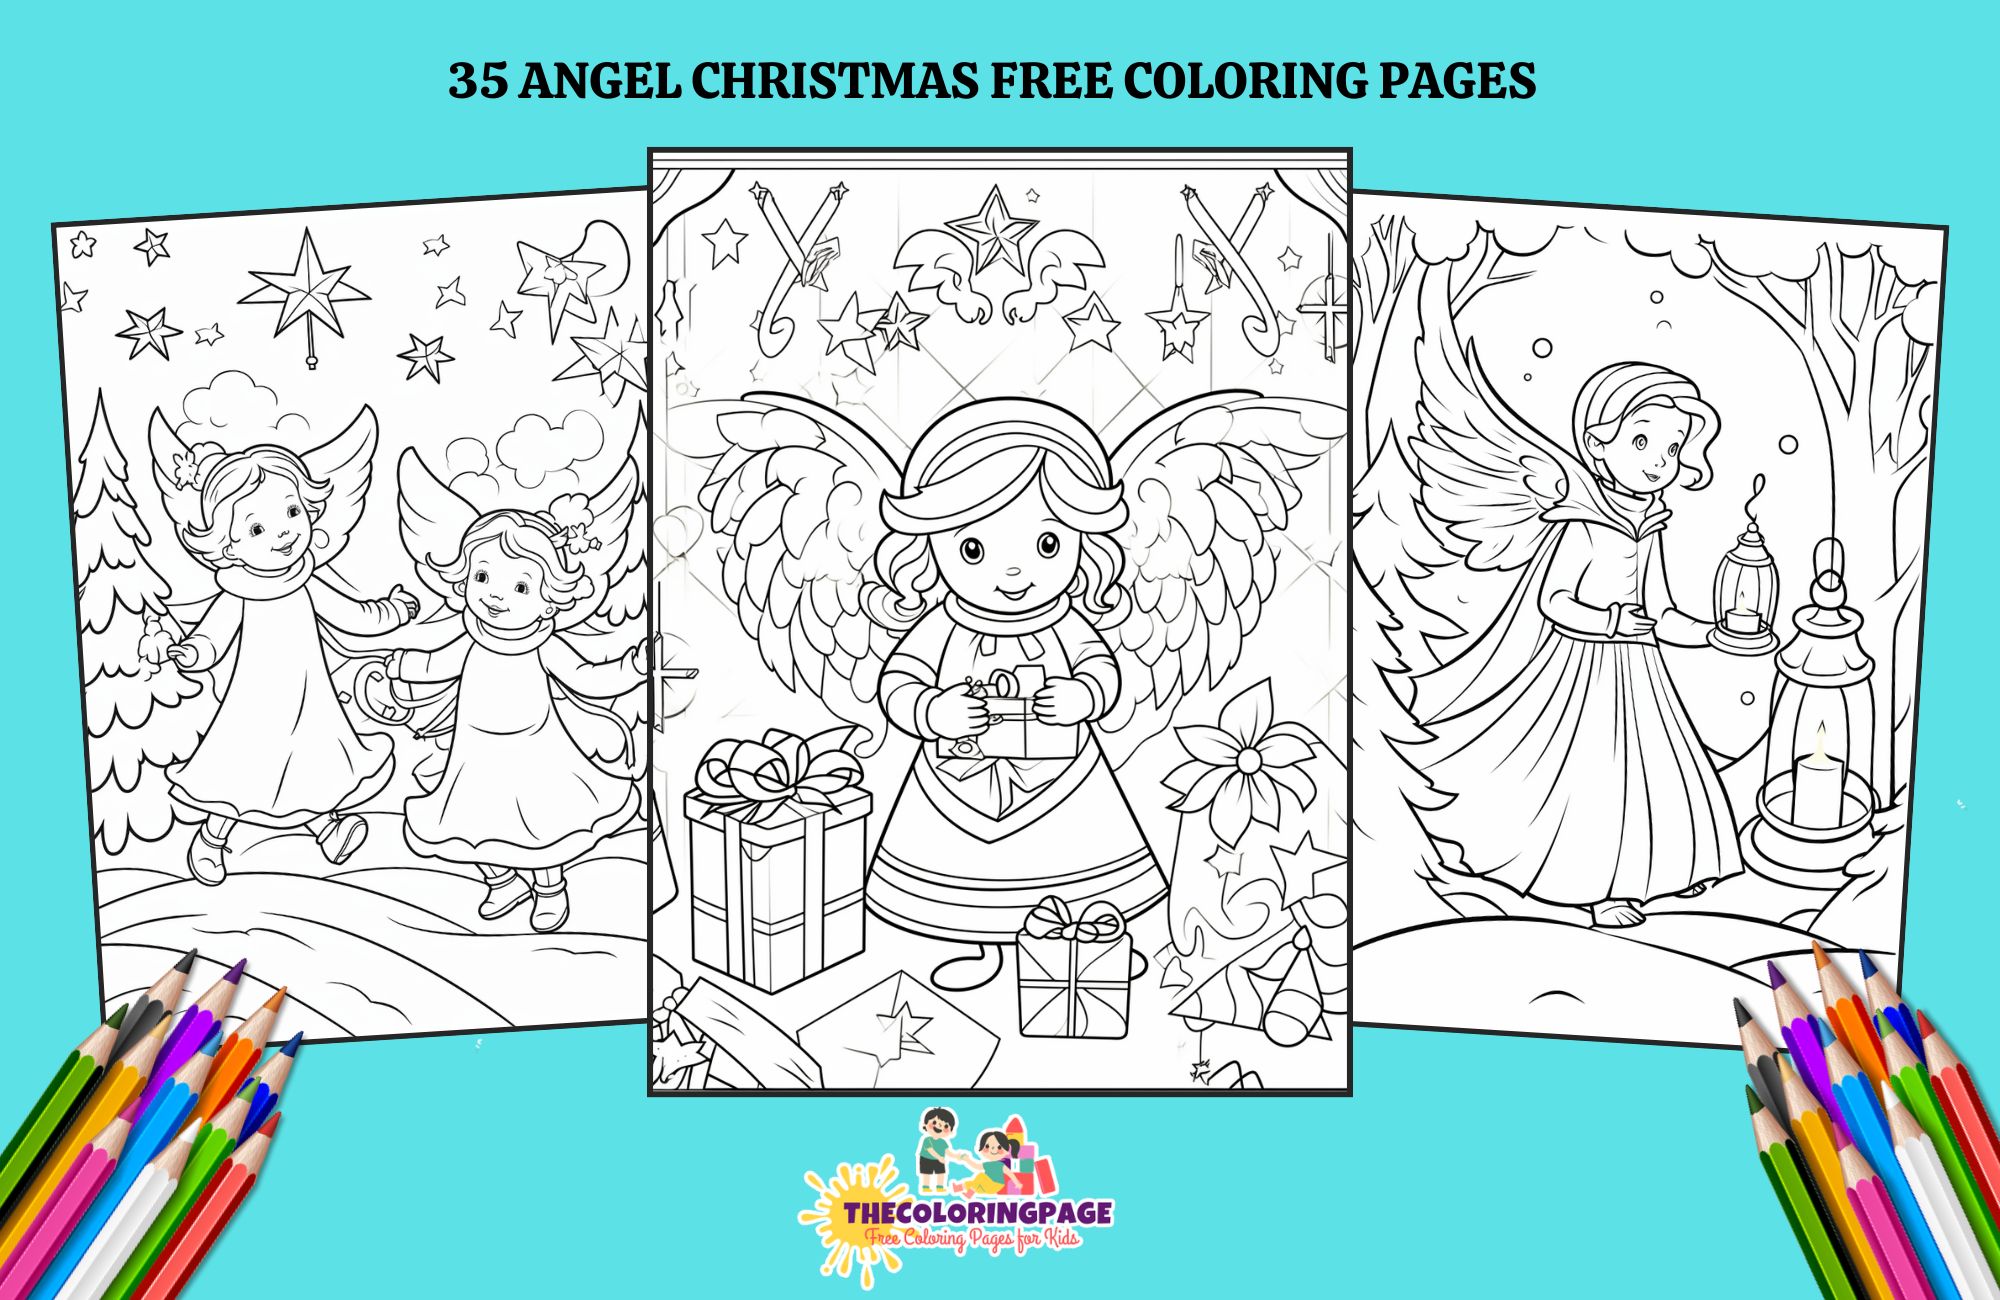 35 Free Angel Christmas Coloring Pages